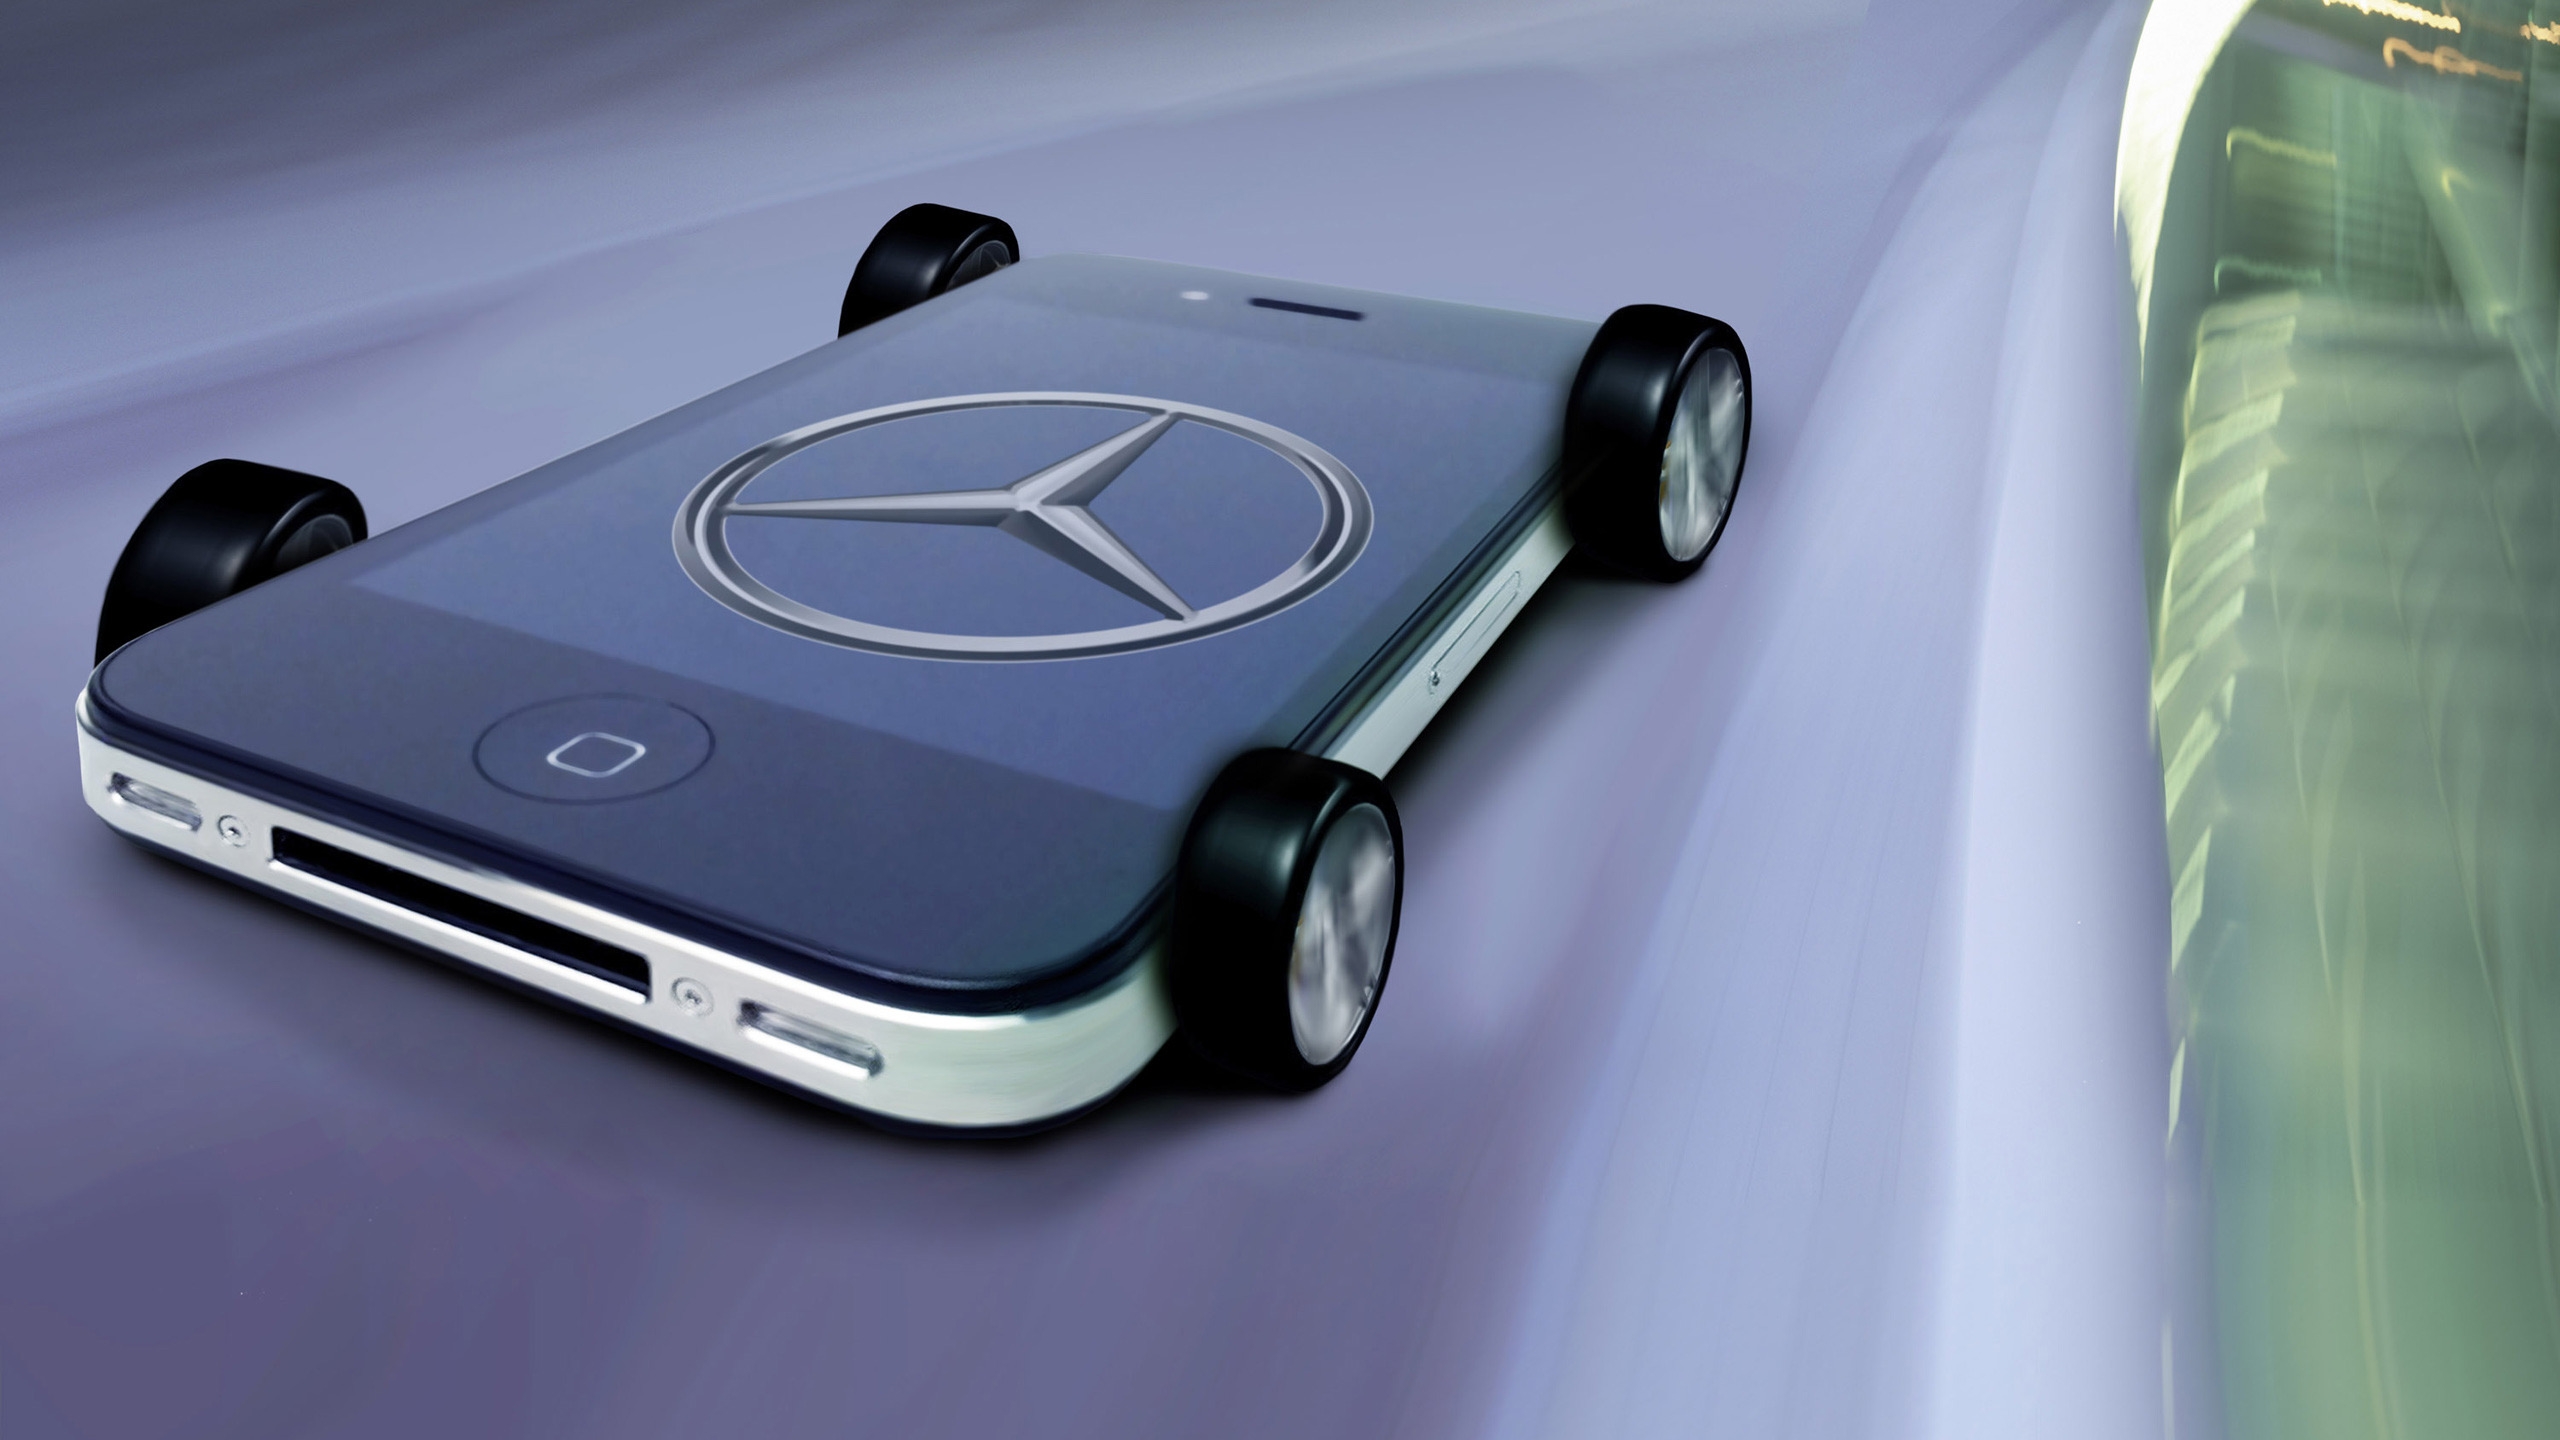 Mercedes Benz iPhone for 2560x1440 HDTV resolution